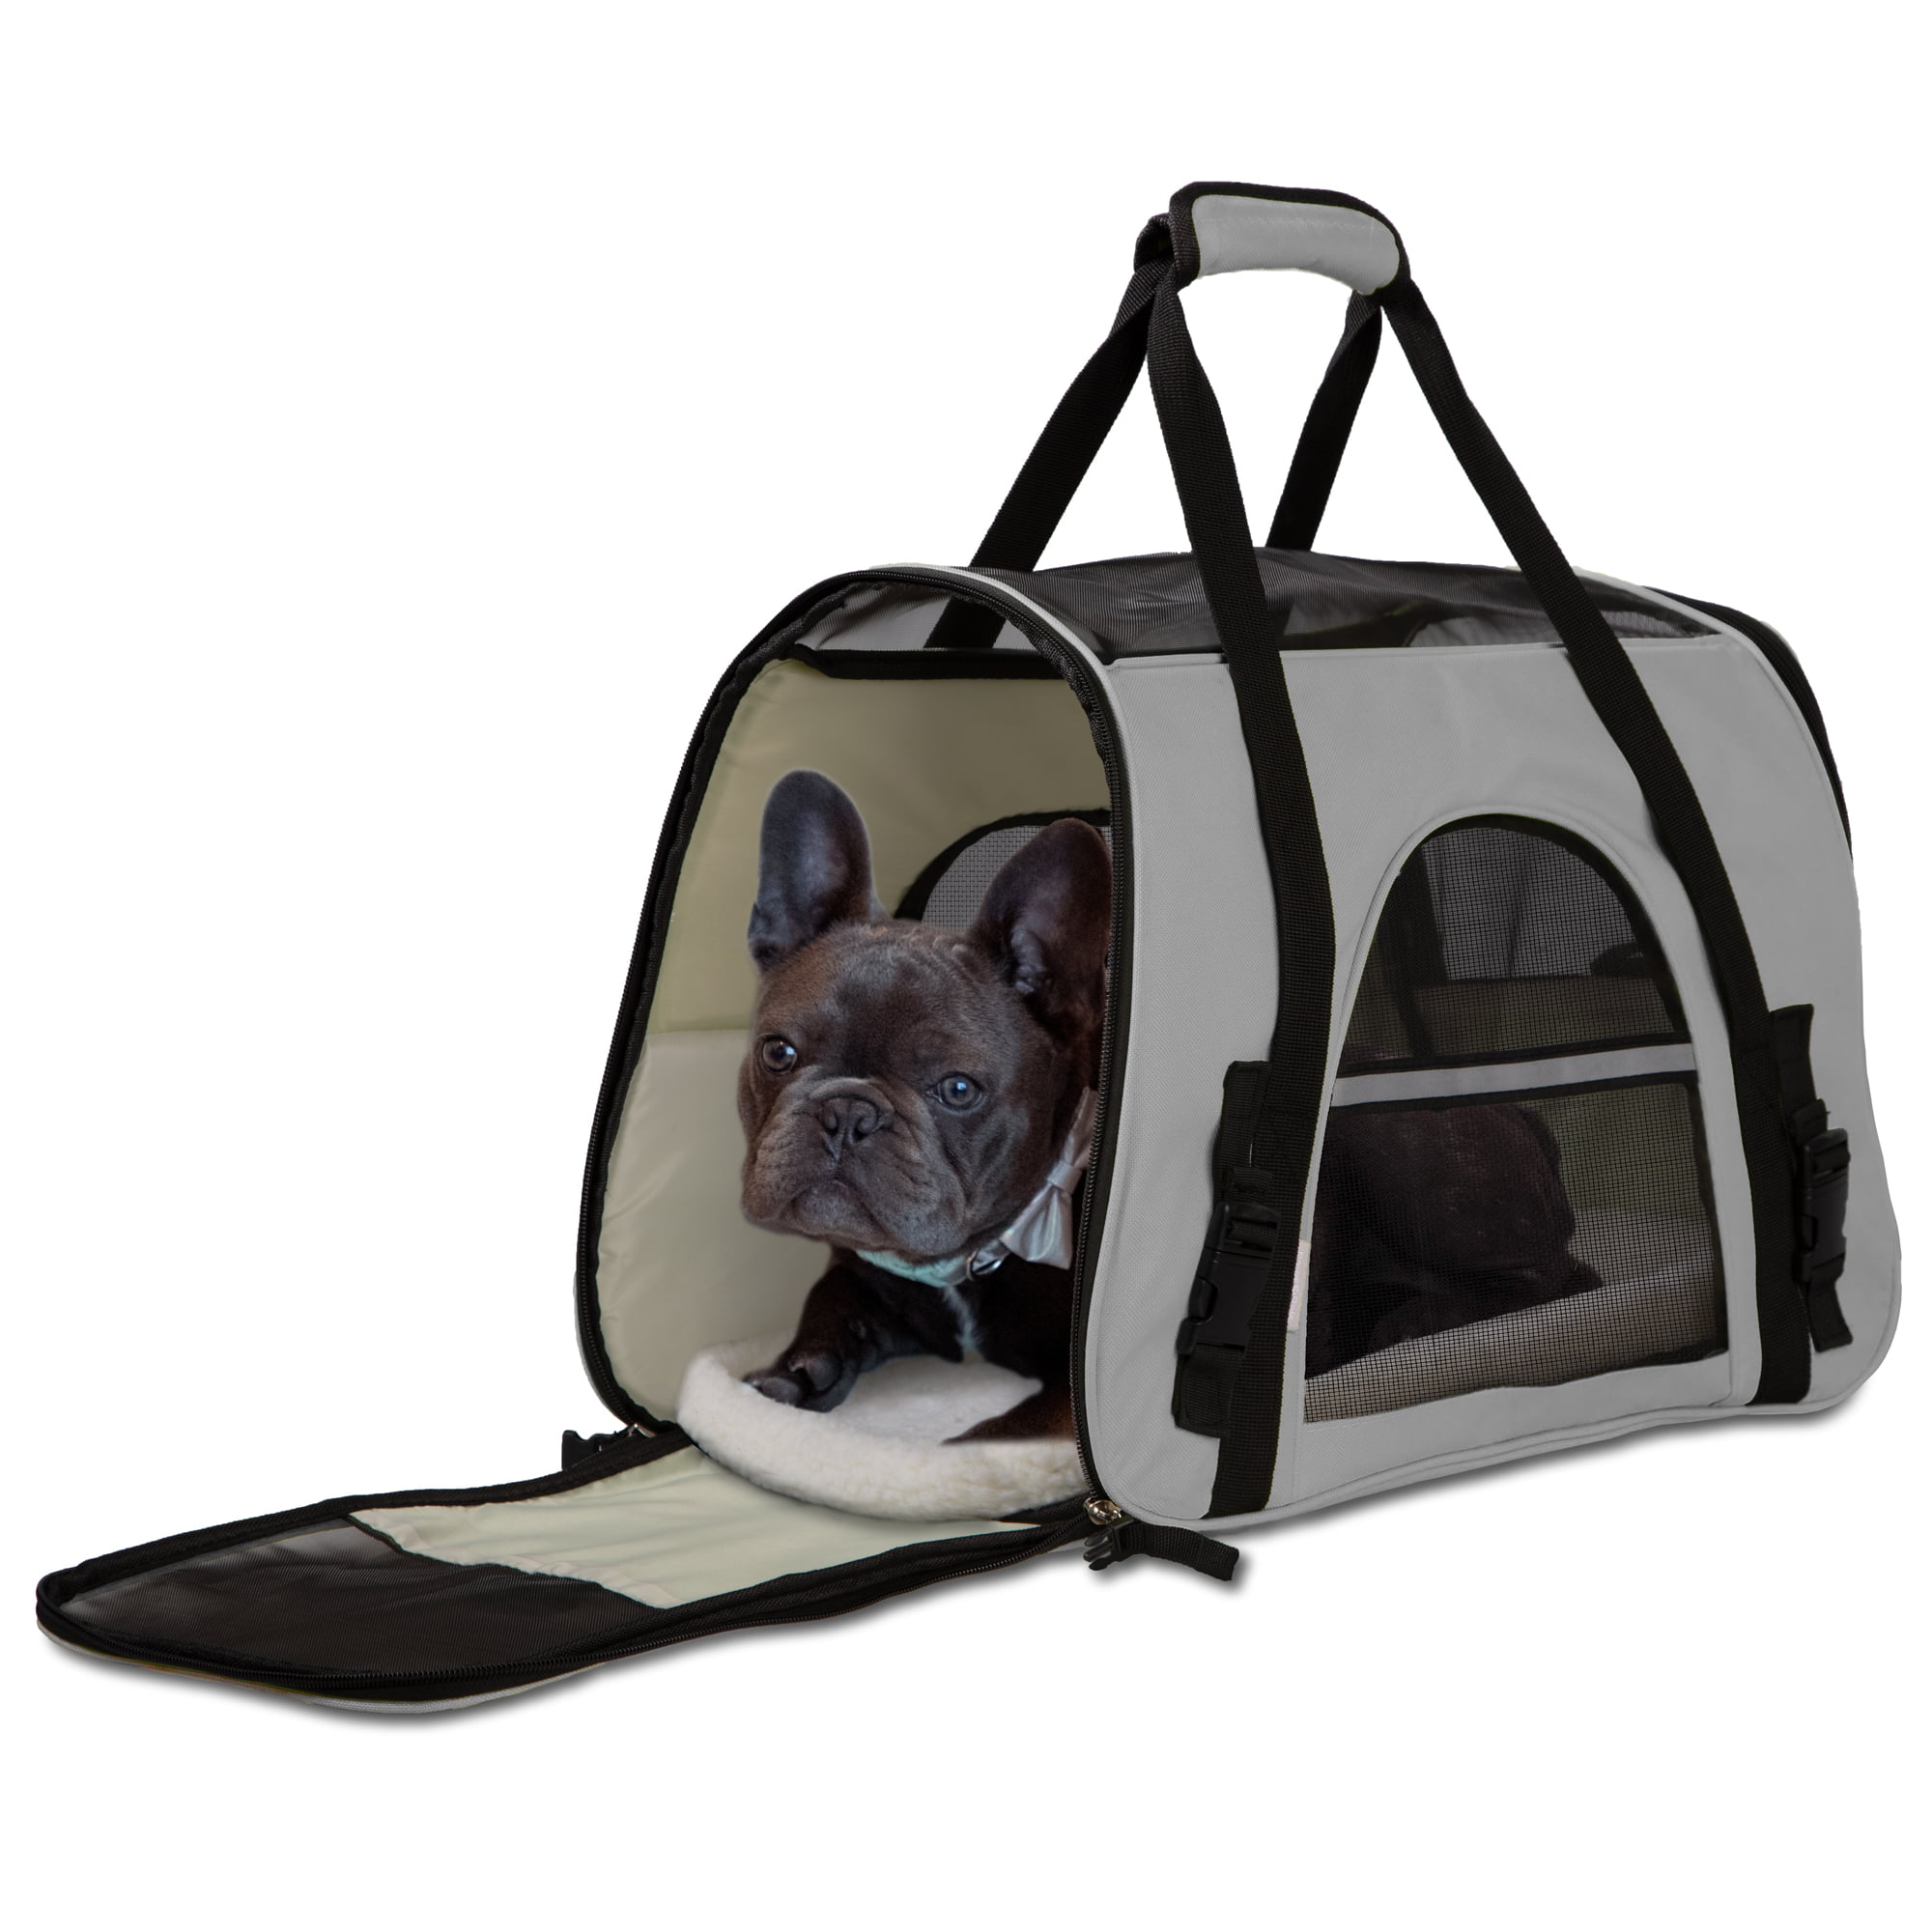 Paws & Pals Airline Approved Pet Carriers w/Fleece Bed for Dog & Cat 